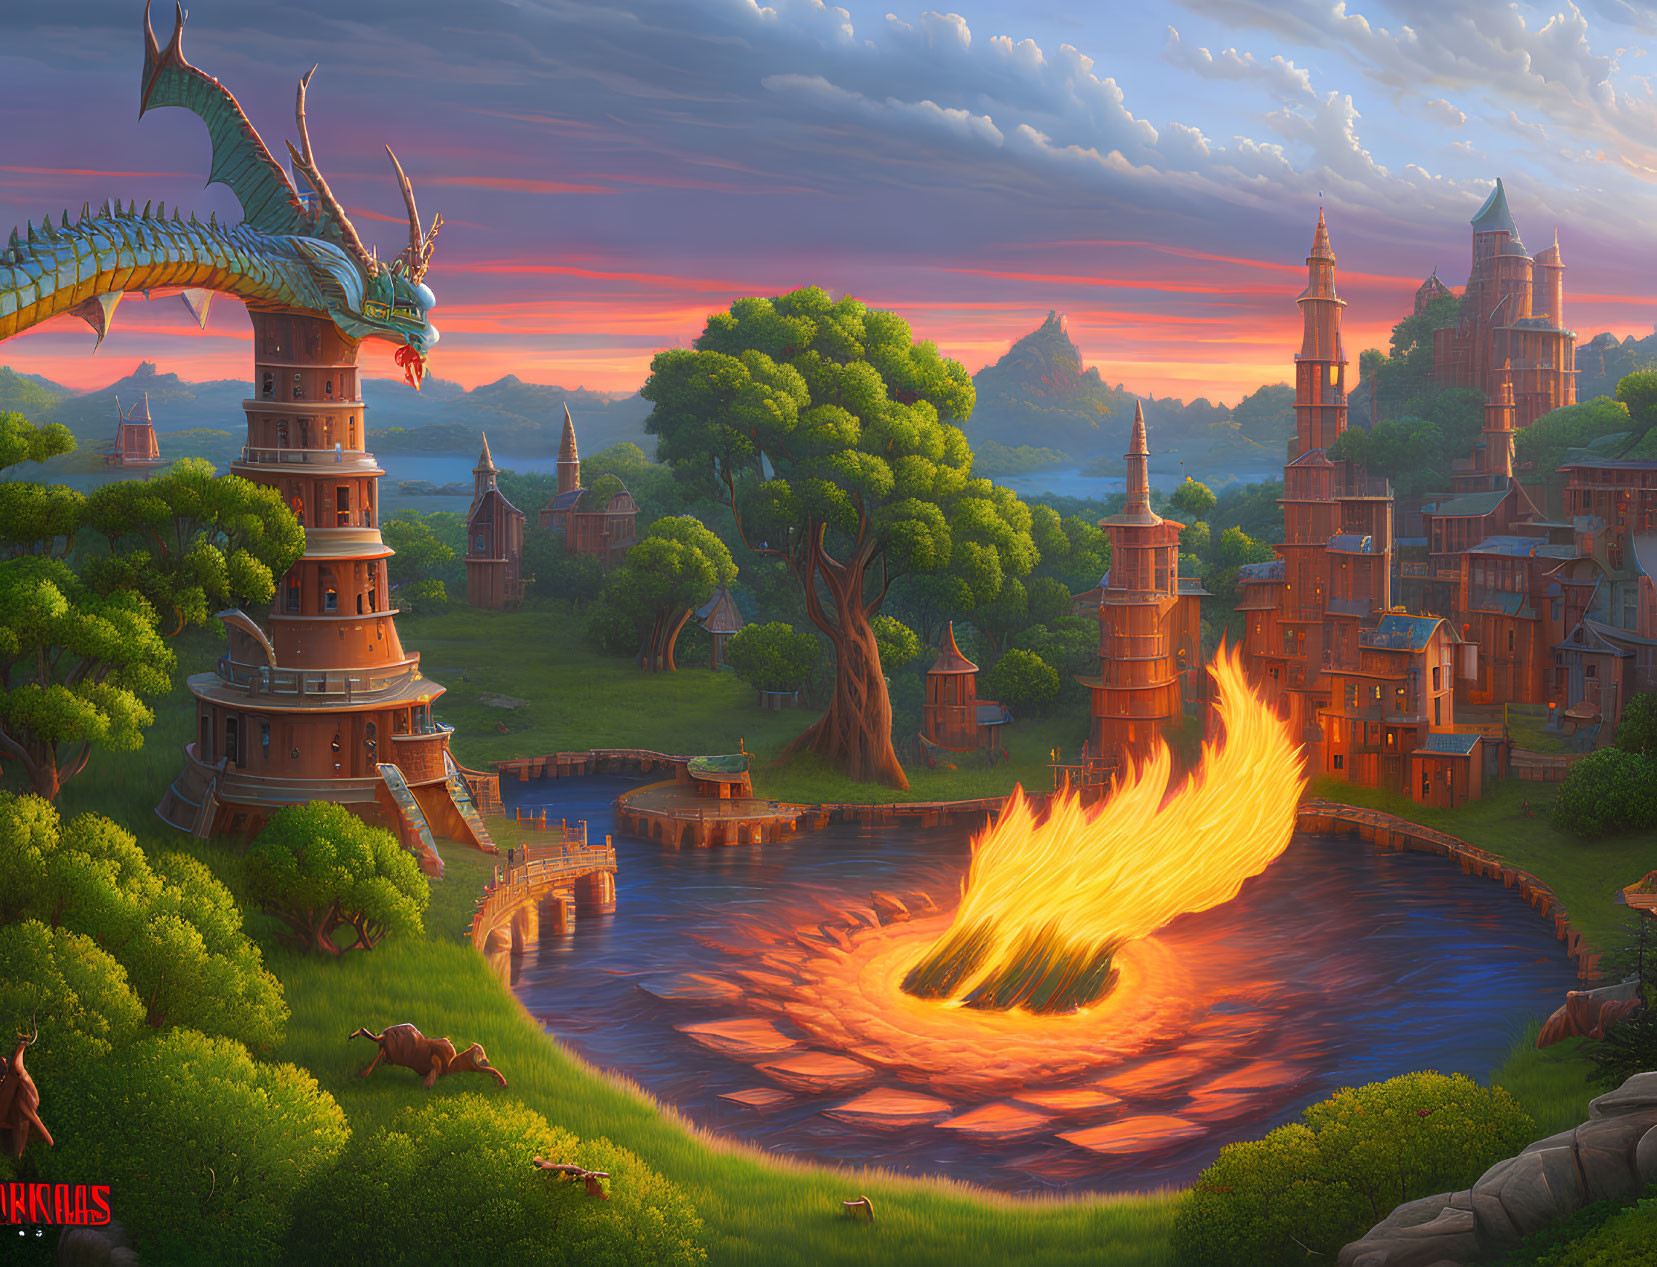 Fantastical sunset landscape with fire-breathing dragon circling tower and whimsical village.